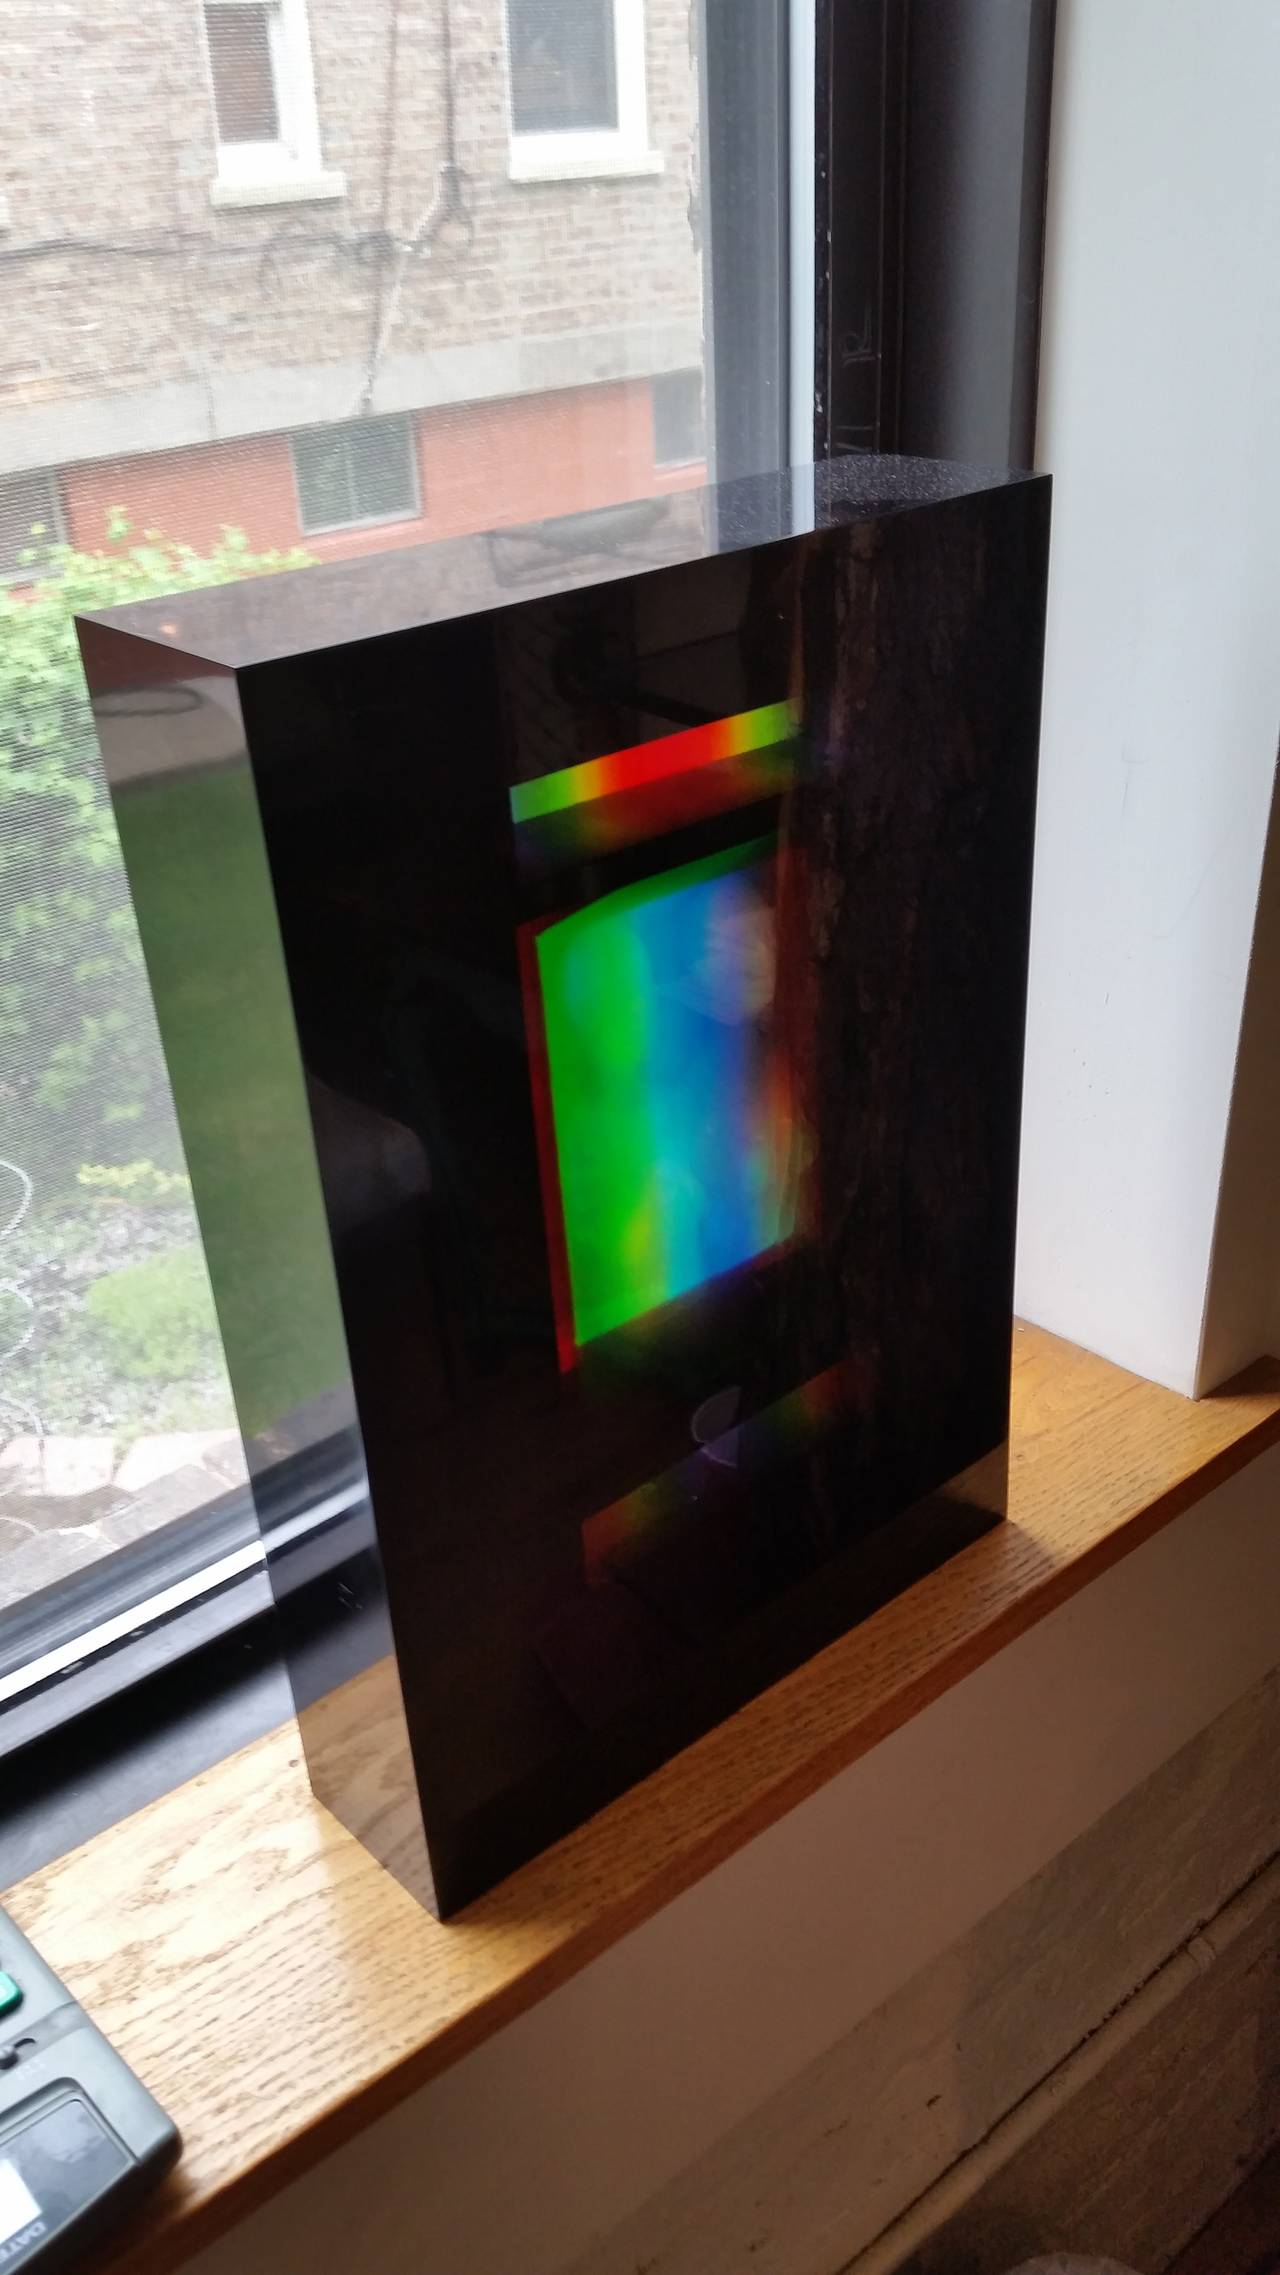 An impressive Hologram set in a thick Lucite block.
The middle Hologram is of two women and is flanked by two multicolored bands.
Purchased from a Chicago art collector. The piece is not signed.
This object does not photograph well.
In person